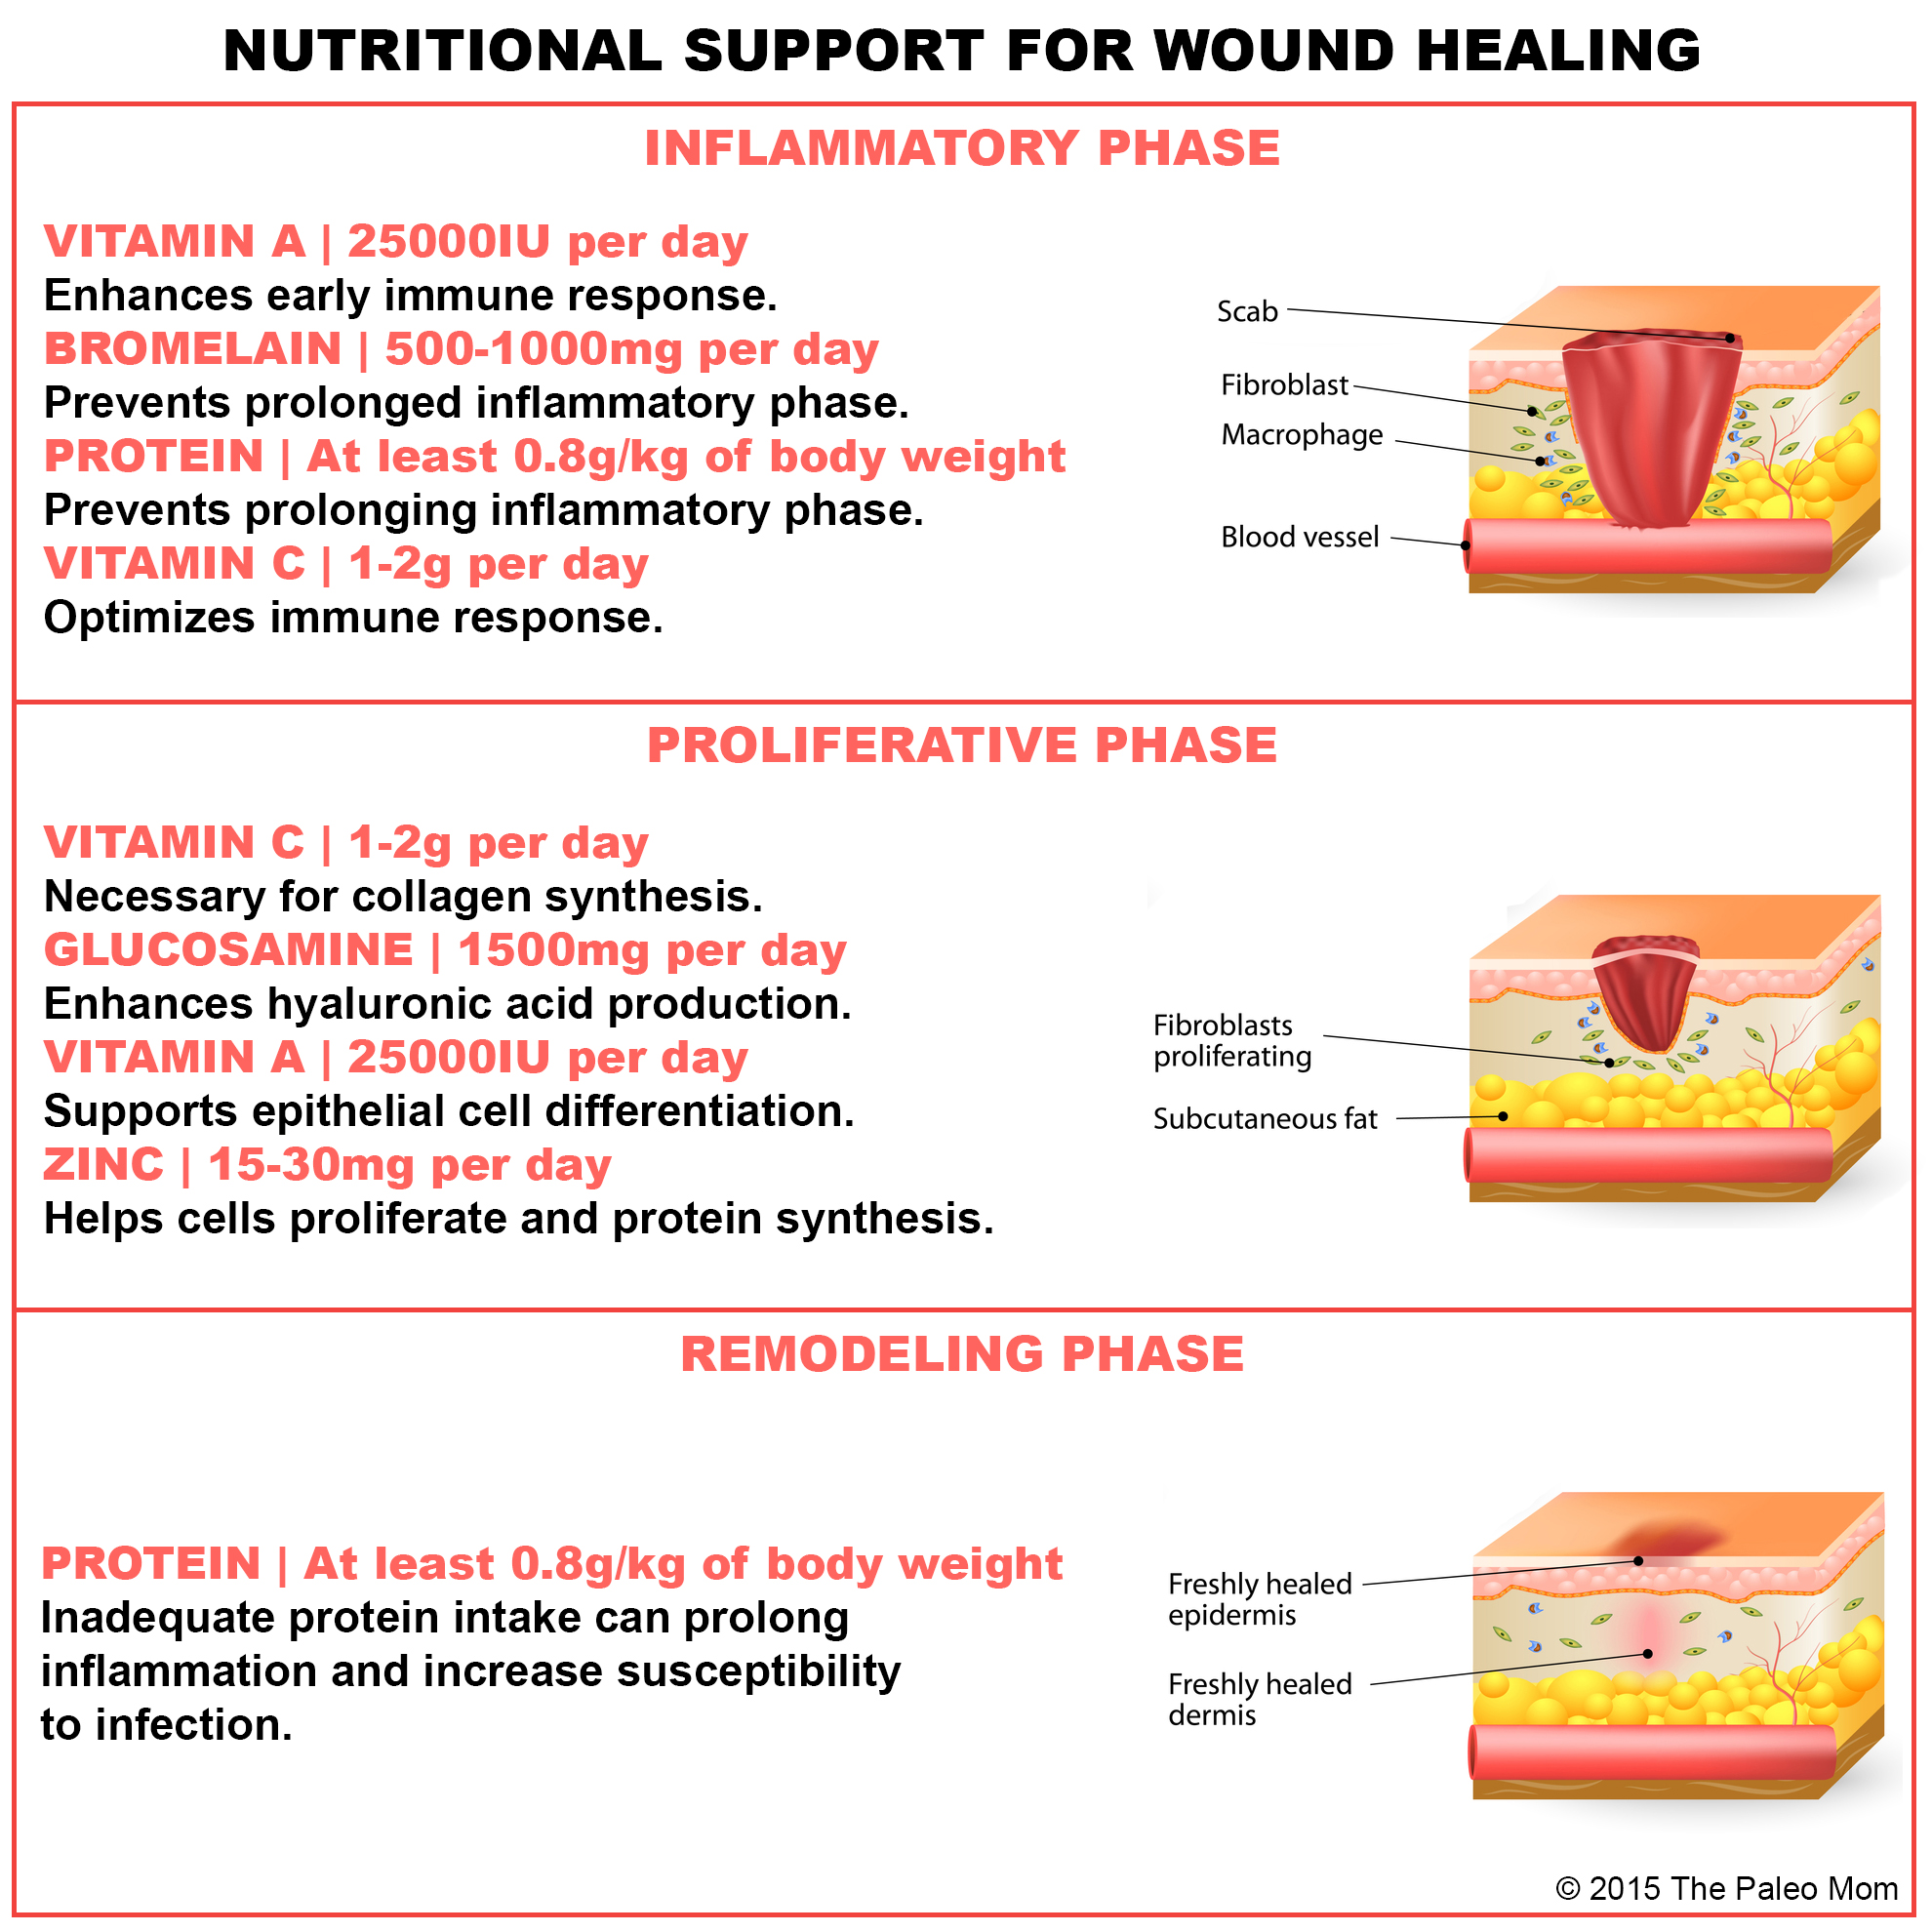 dietary protein intake promotes wound healing